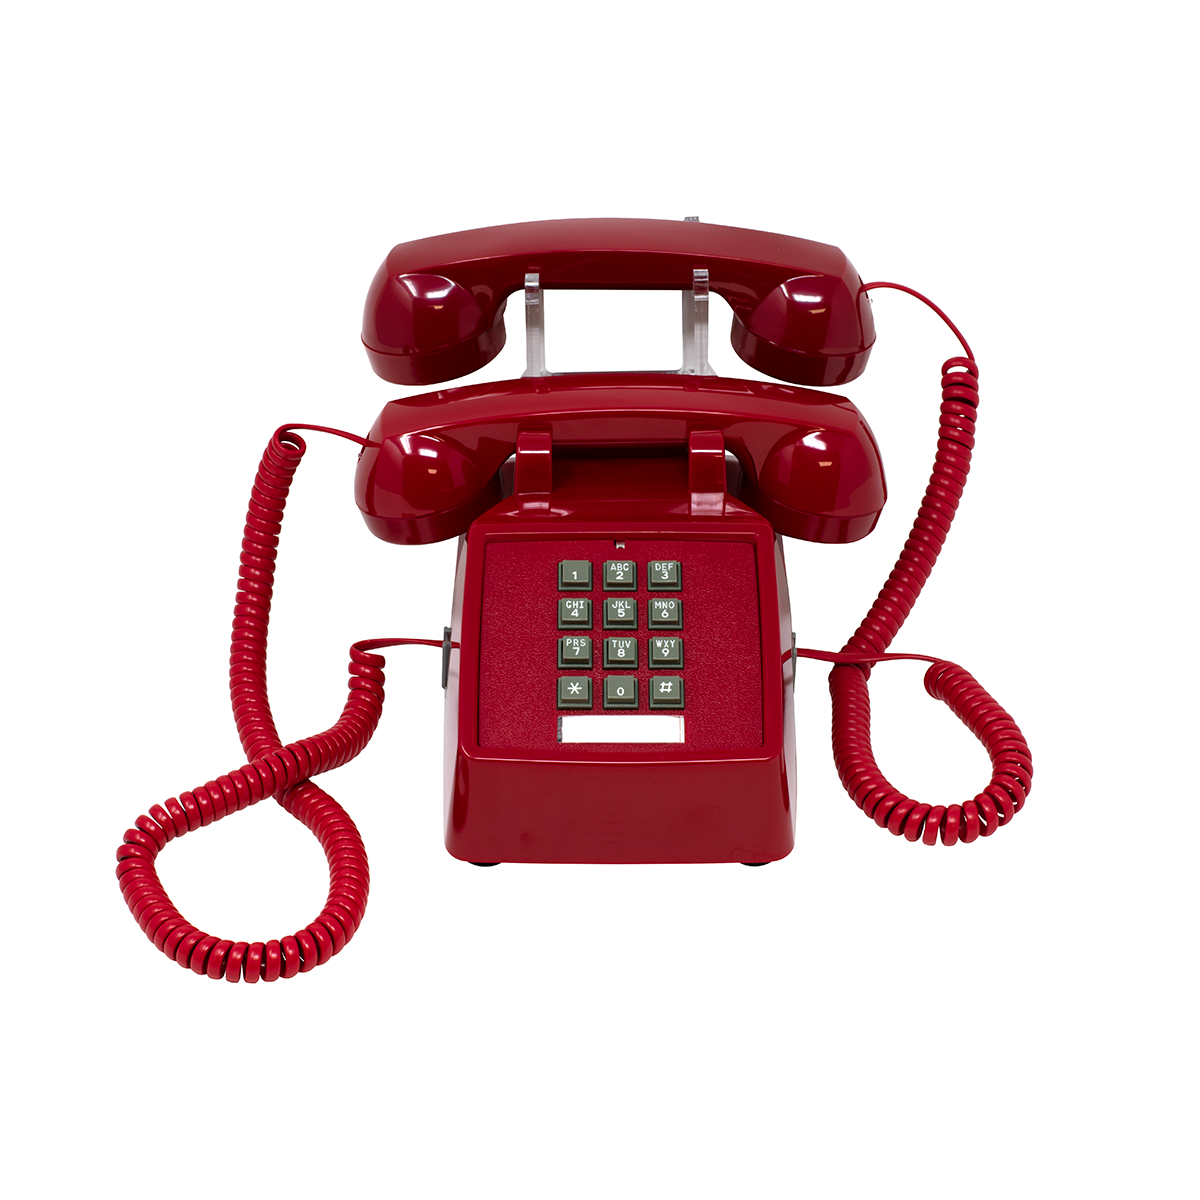 Red 2500 Consultation Desk Phone (Front View)